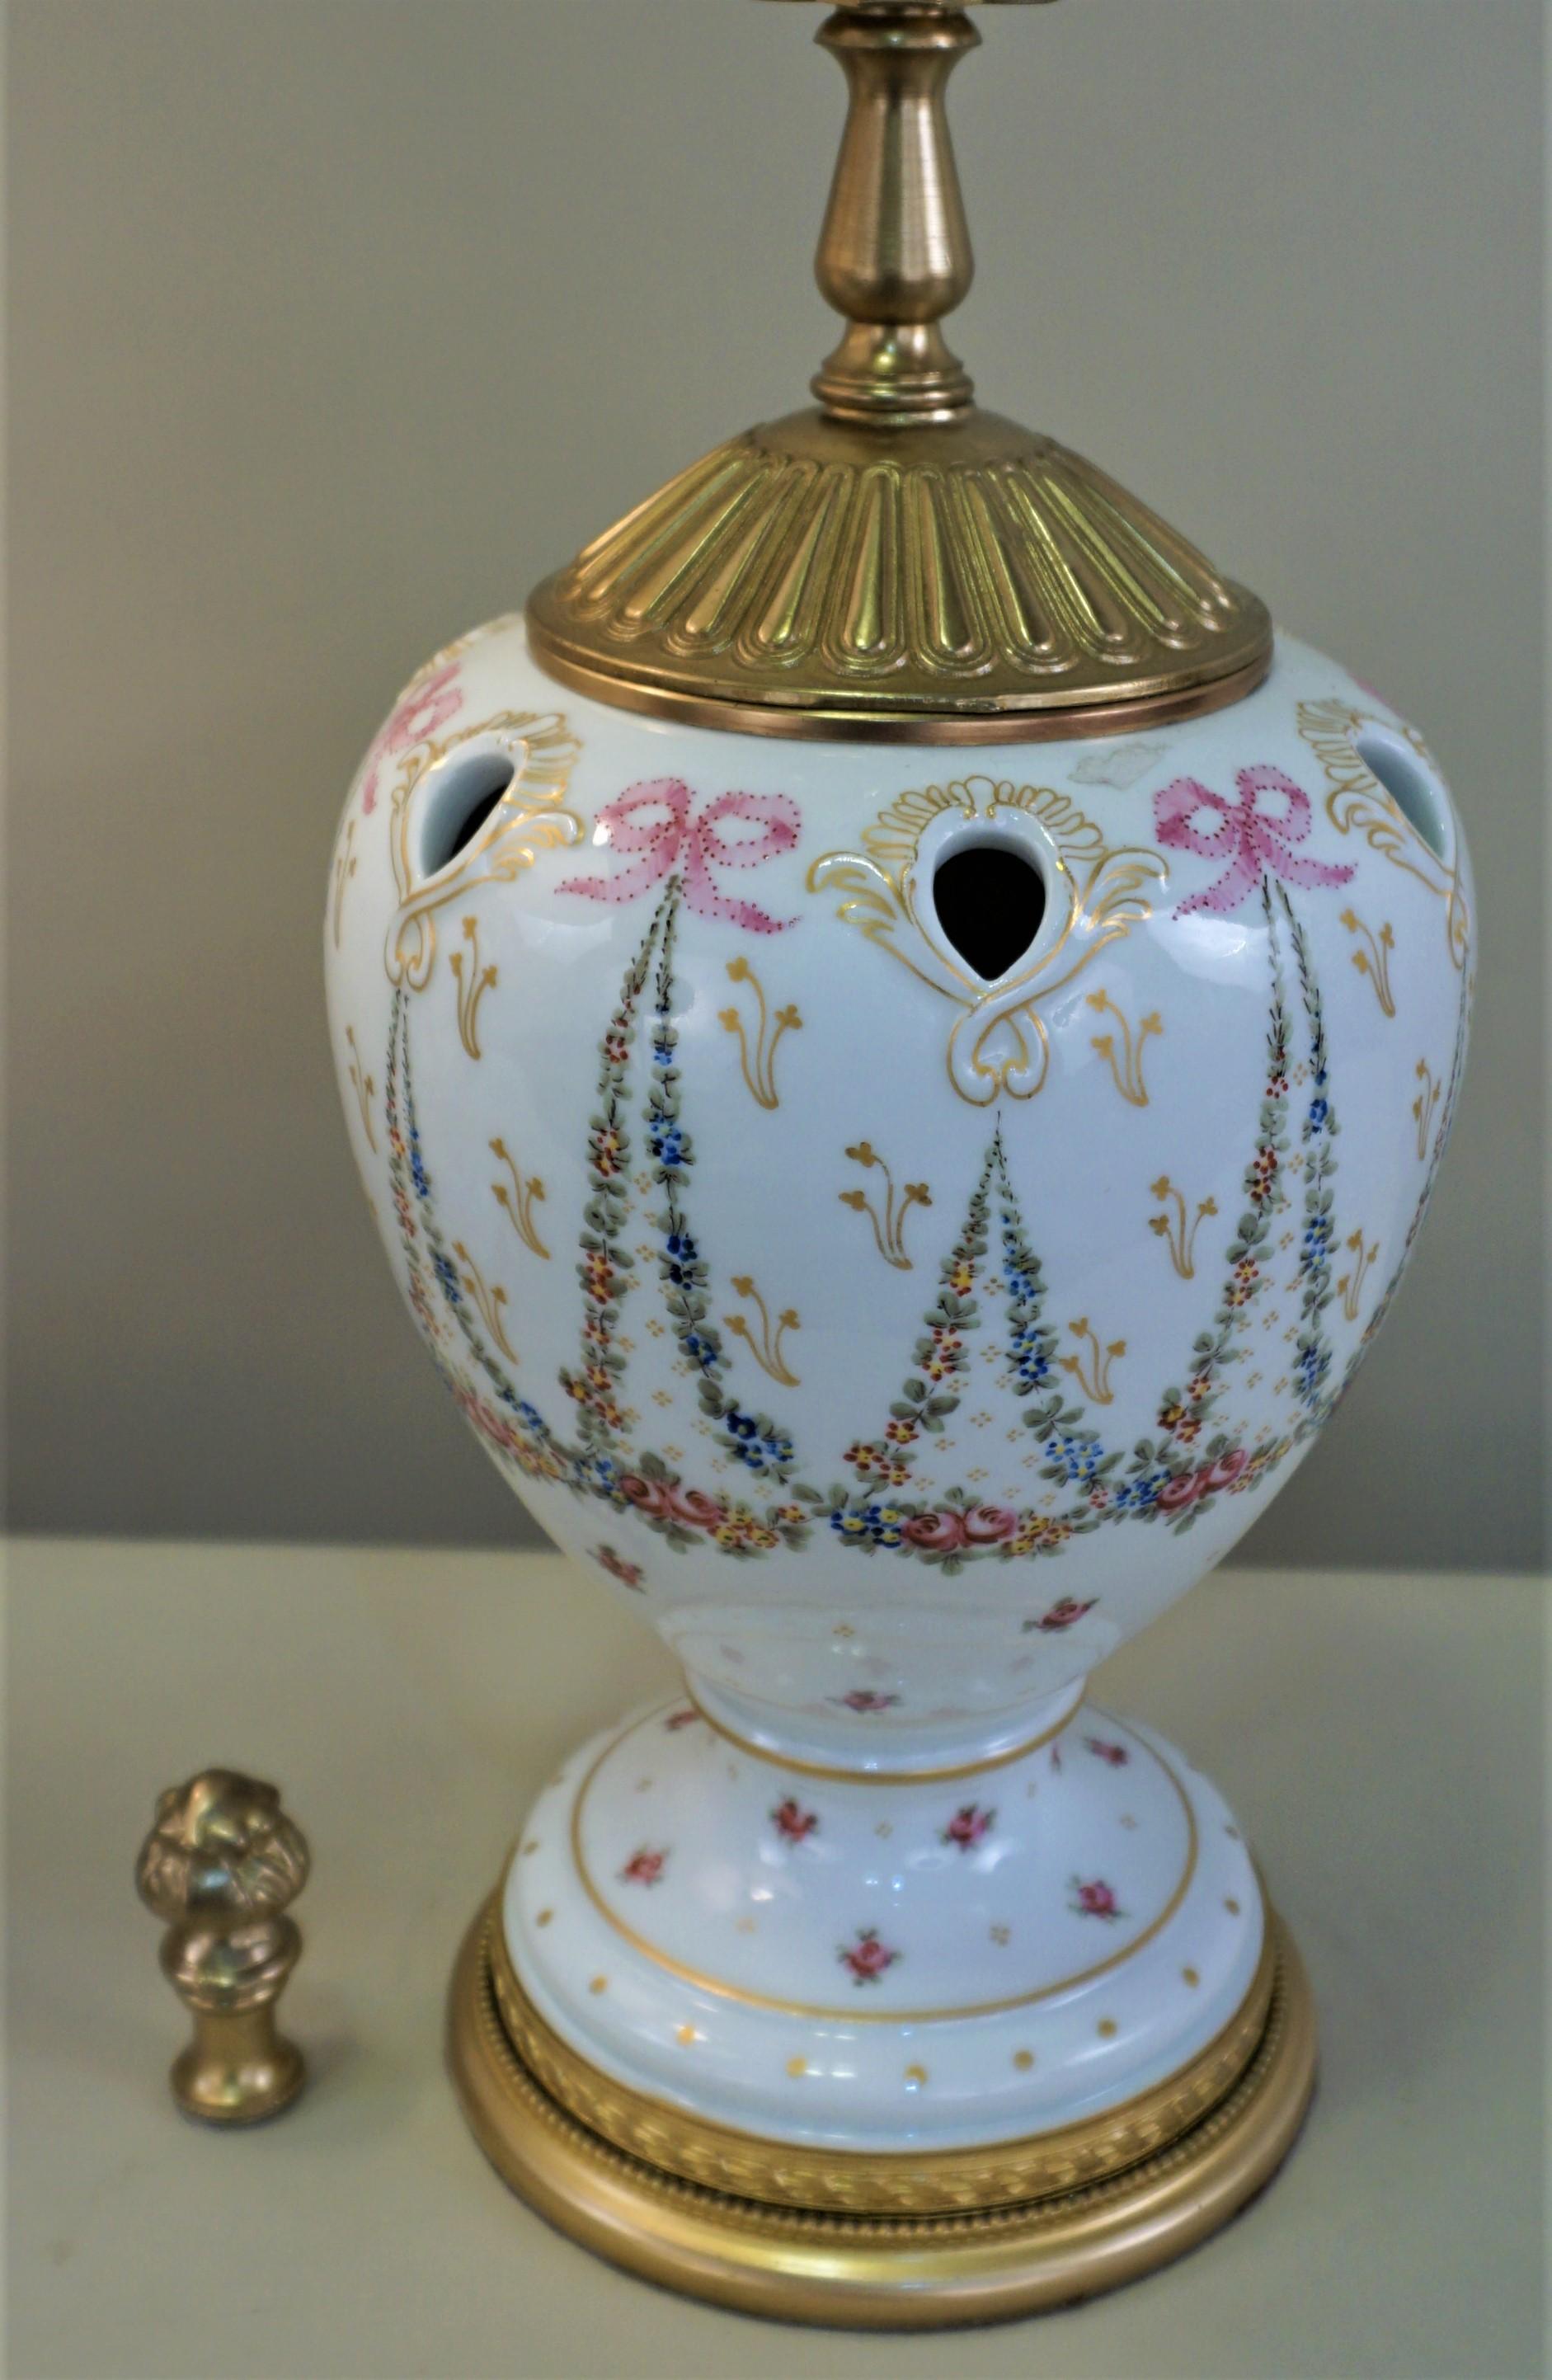 Pair of hand painted porcelain vases with bronze mounting that have been customized to table lamps and fitted with silk lampshades
Measurement include the shade.